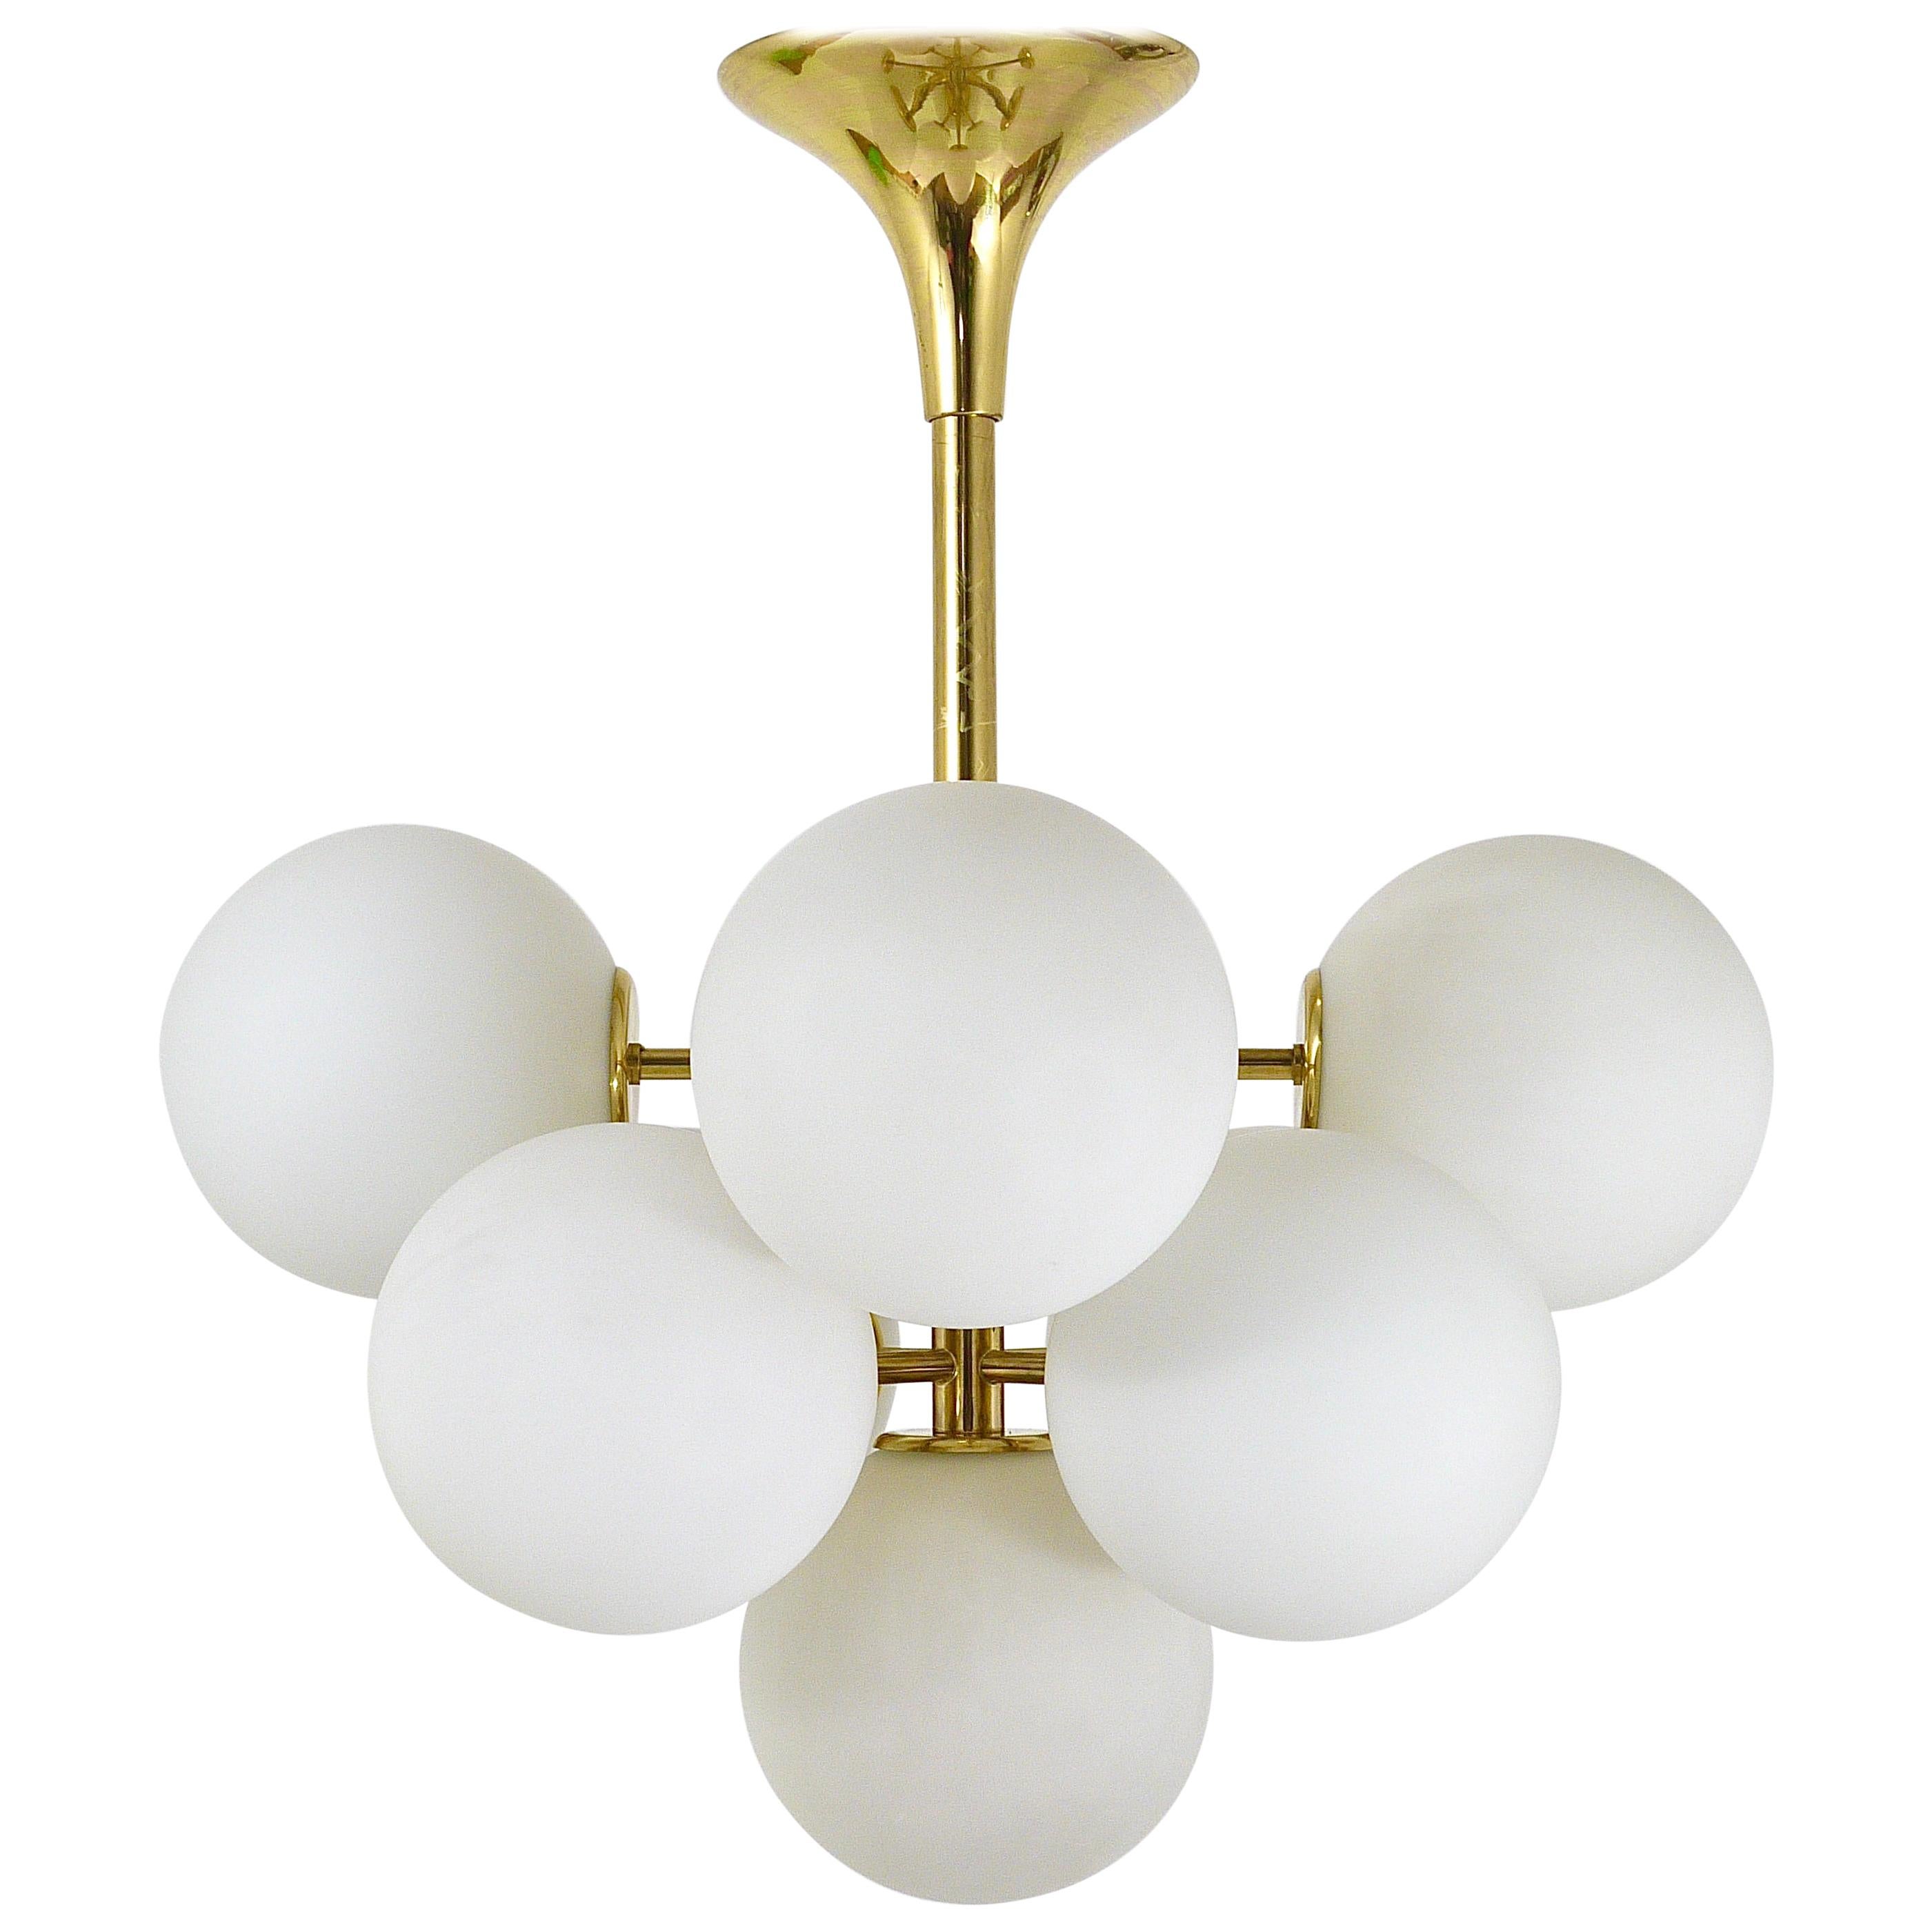 Atomic Brass Chandelier, White Glass Globes, in the style of E. R. Nele by Temde